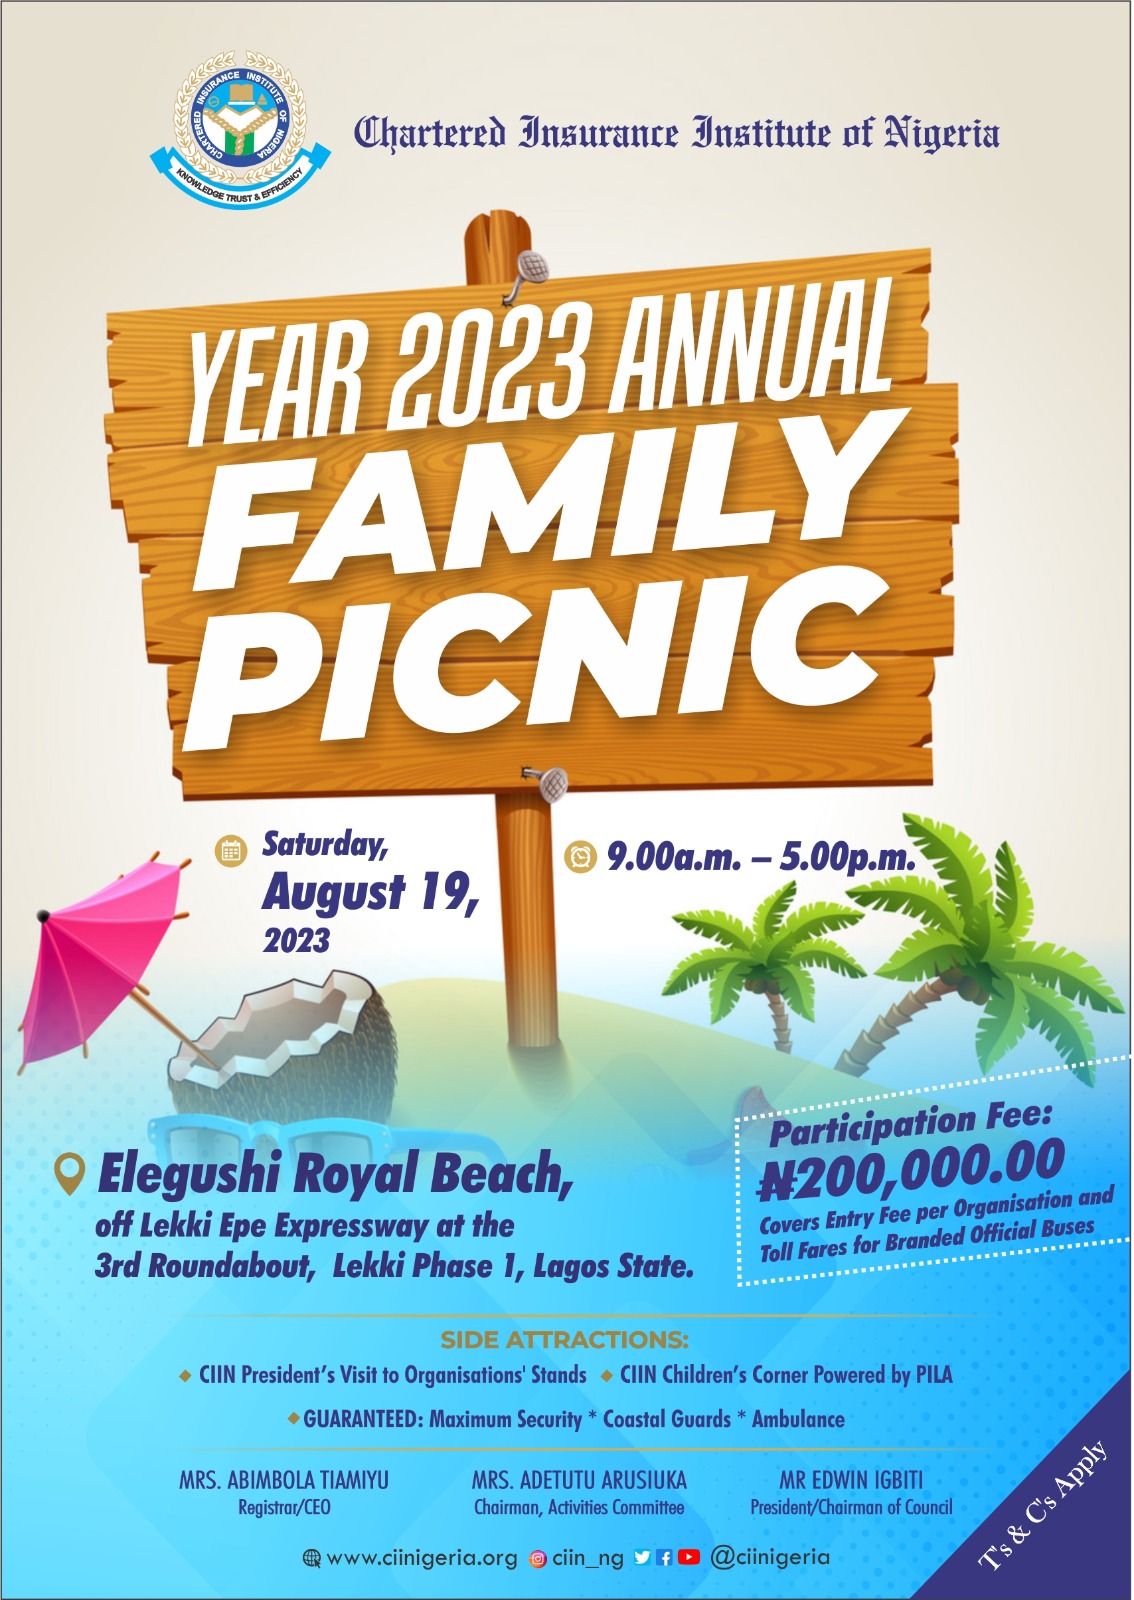 Image for 2023 ANNUAL FAMILY PICNIC